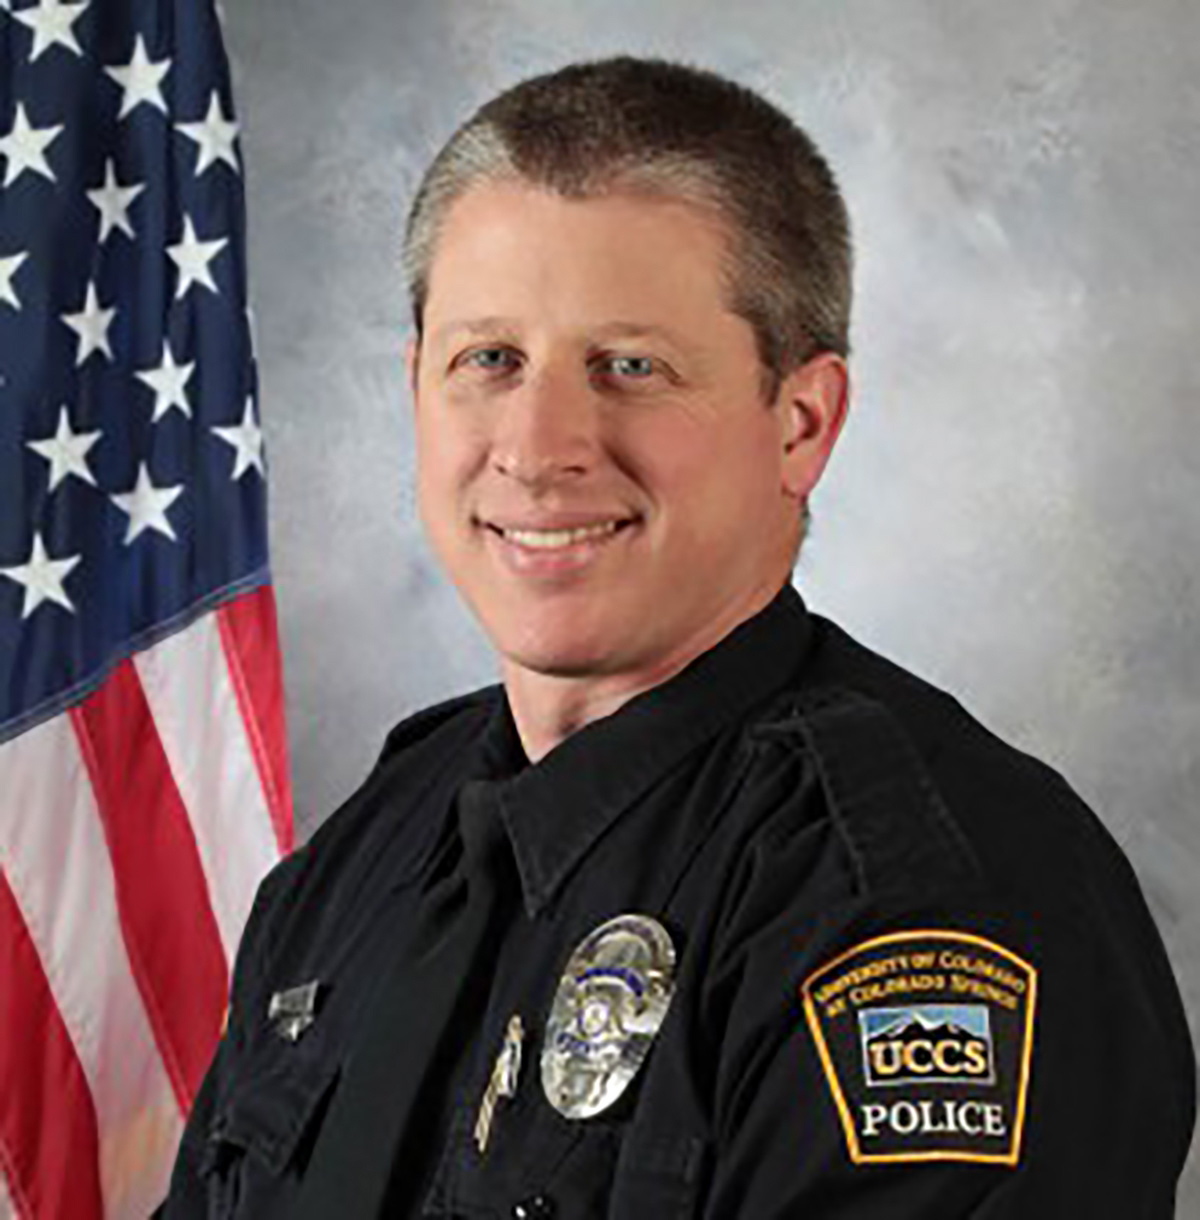 This photo provided by the University of Colorado at Colorado Springs shows officer Garrett Swasey, who was killed in a shooting at a Planned Parenthood clinic in Colorado Springs, Colo., Friday, Nov.